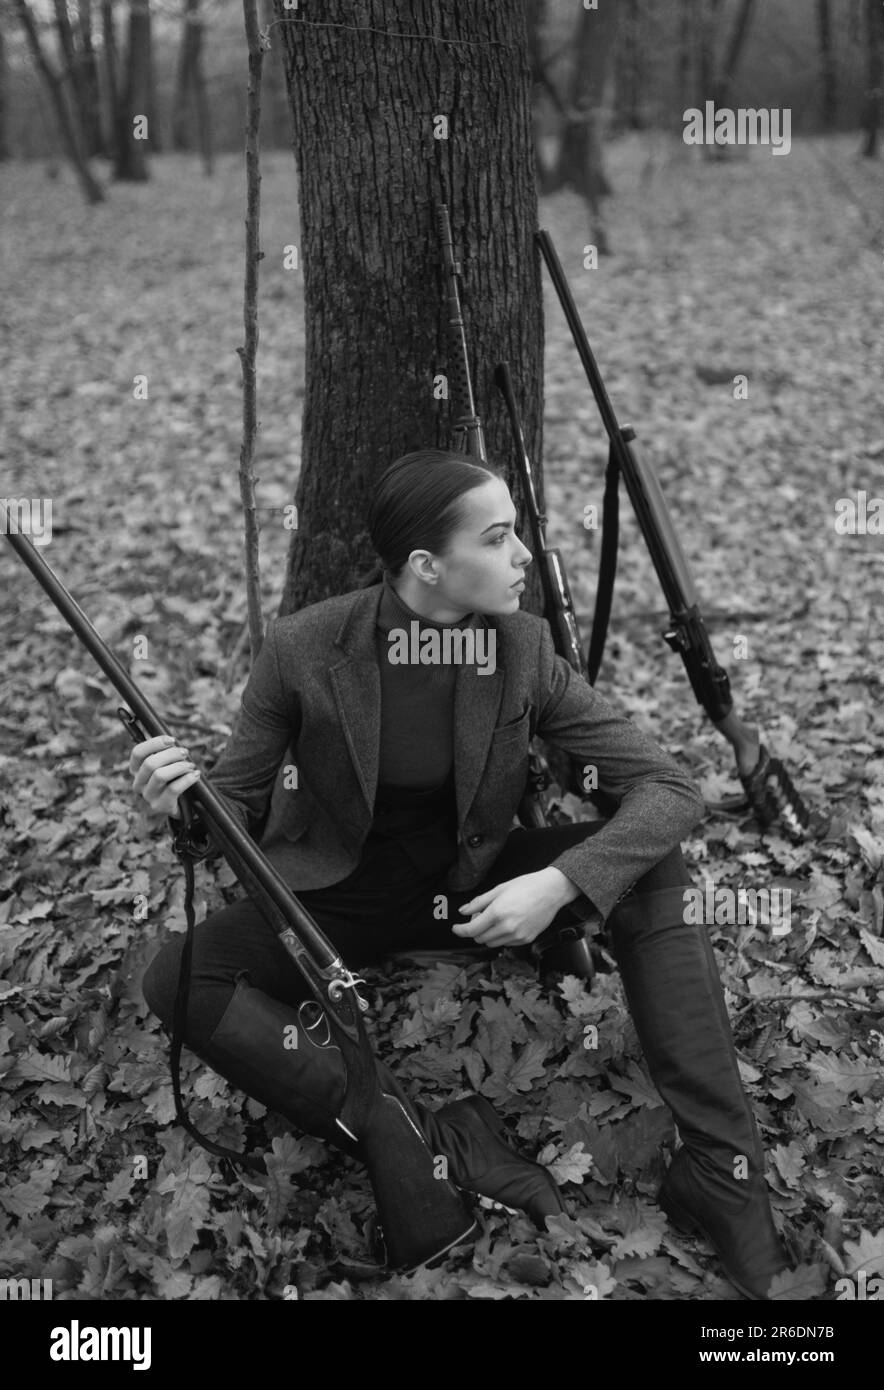 successful hunt. hunting sport. woman with weapon. Target shot. girl with rifle. chase hunting. Gun shop. female hunter in forest. military fashion Stock Photo